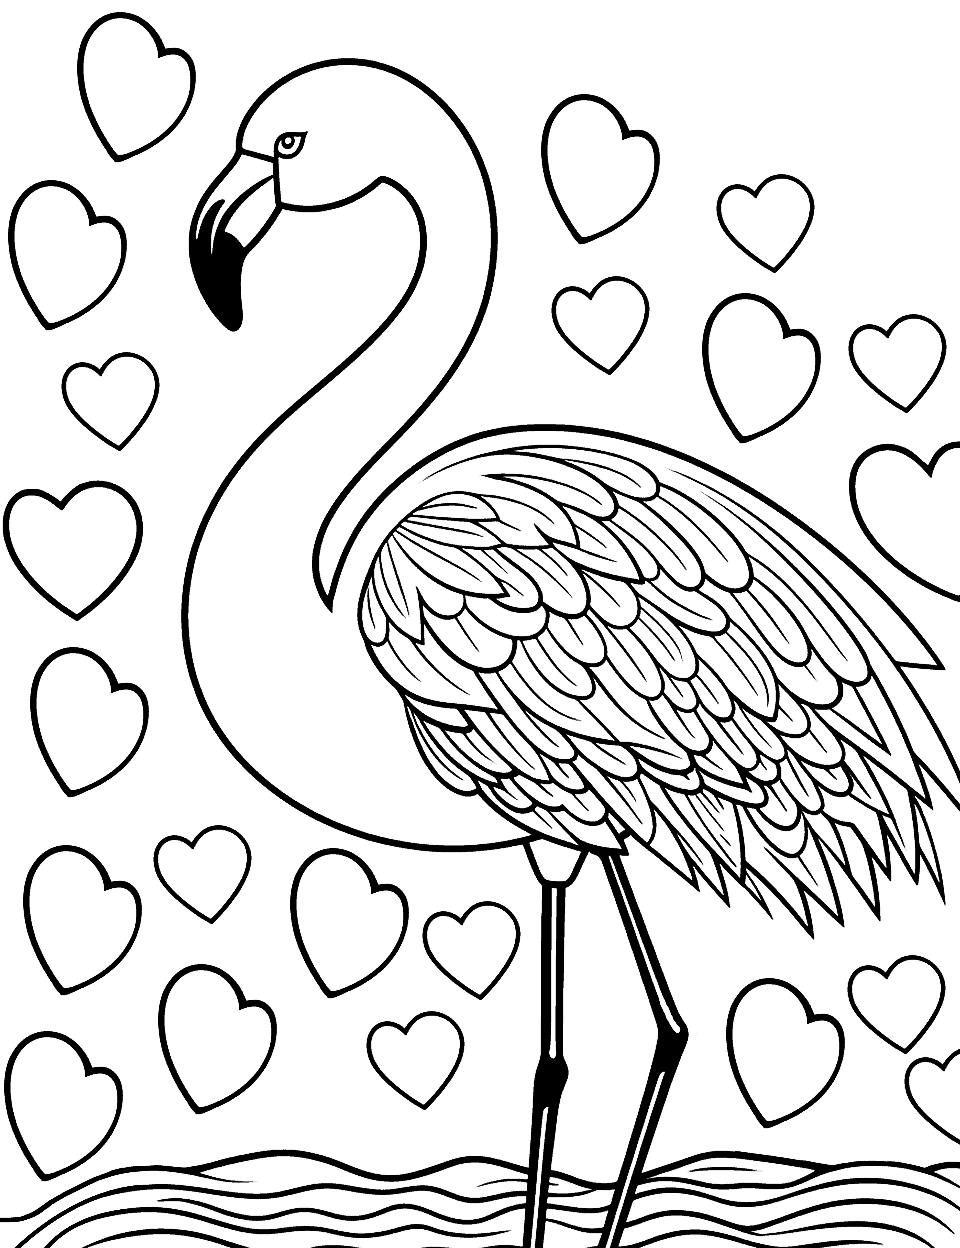 Flamingo with Heart Shapes Coloring Page - A flamingo surrounded by heart shapes, ideal for Valentine’s Day-themed coloring.